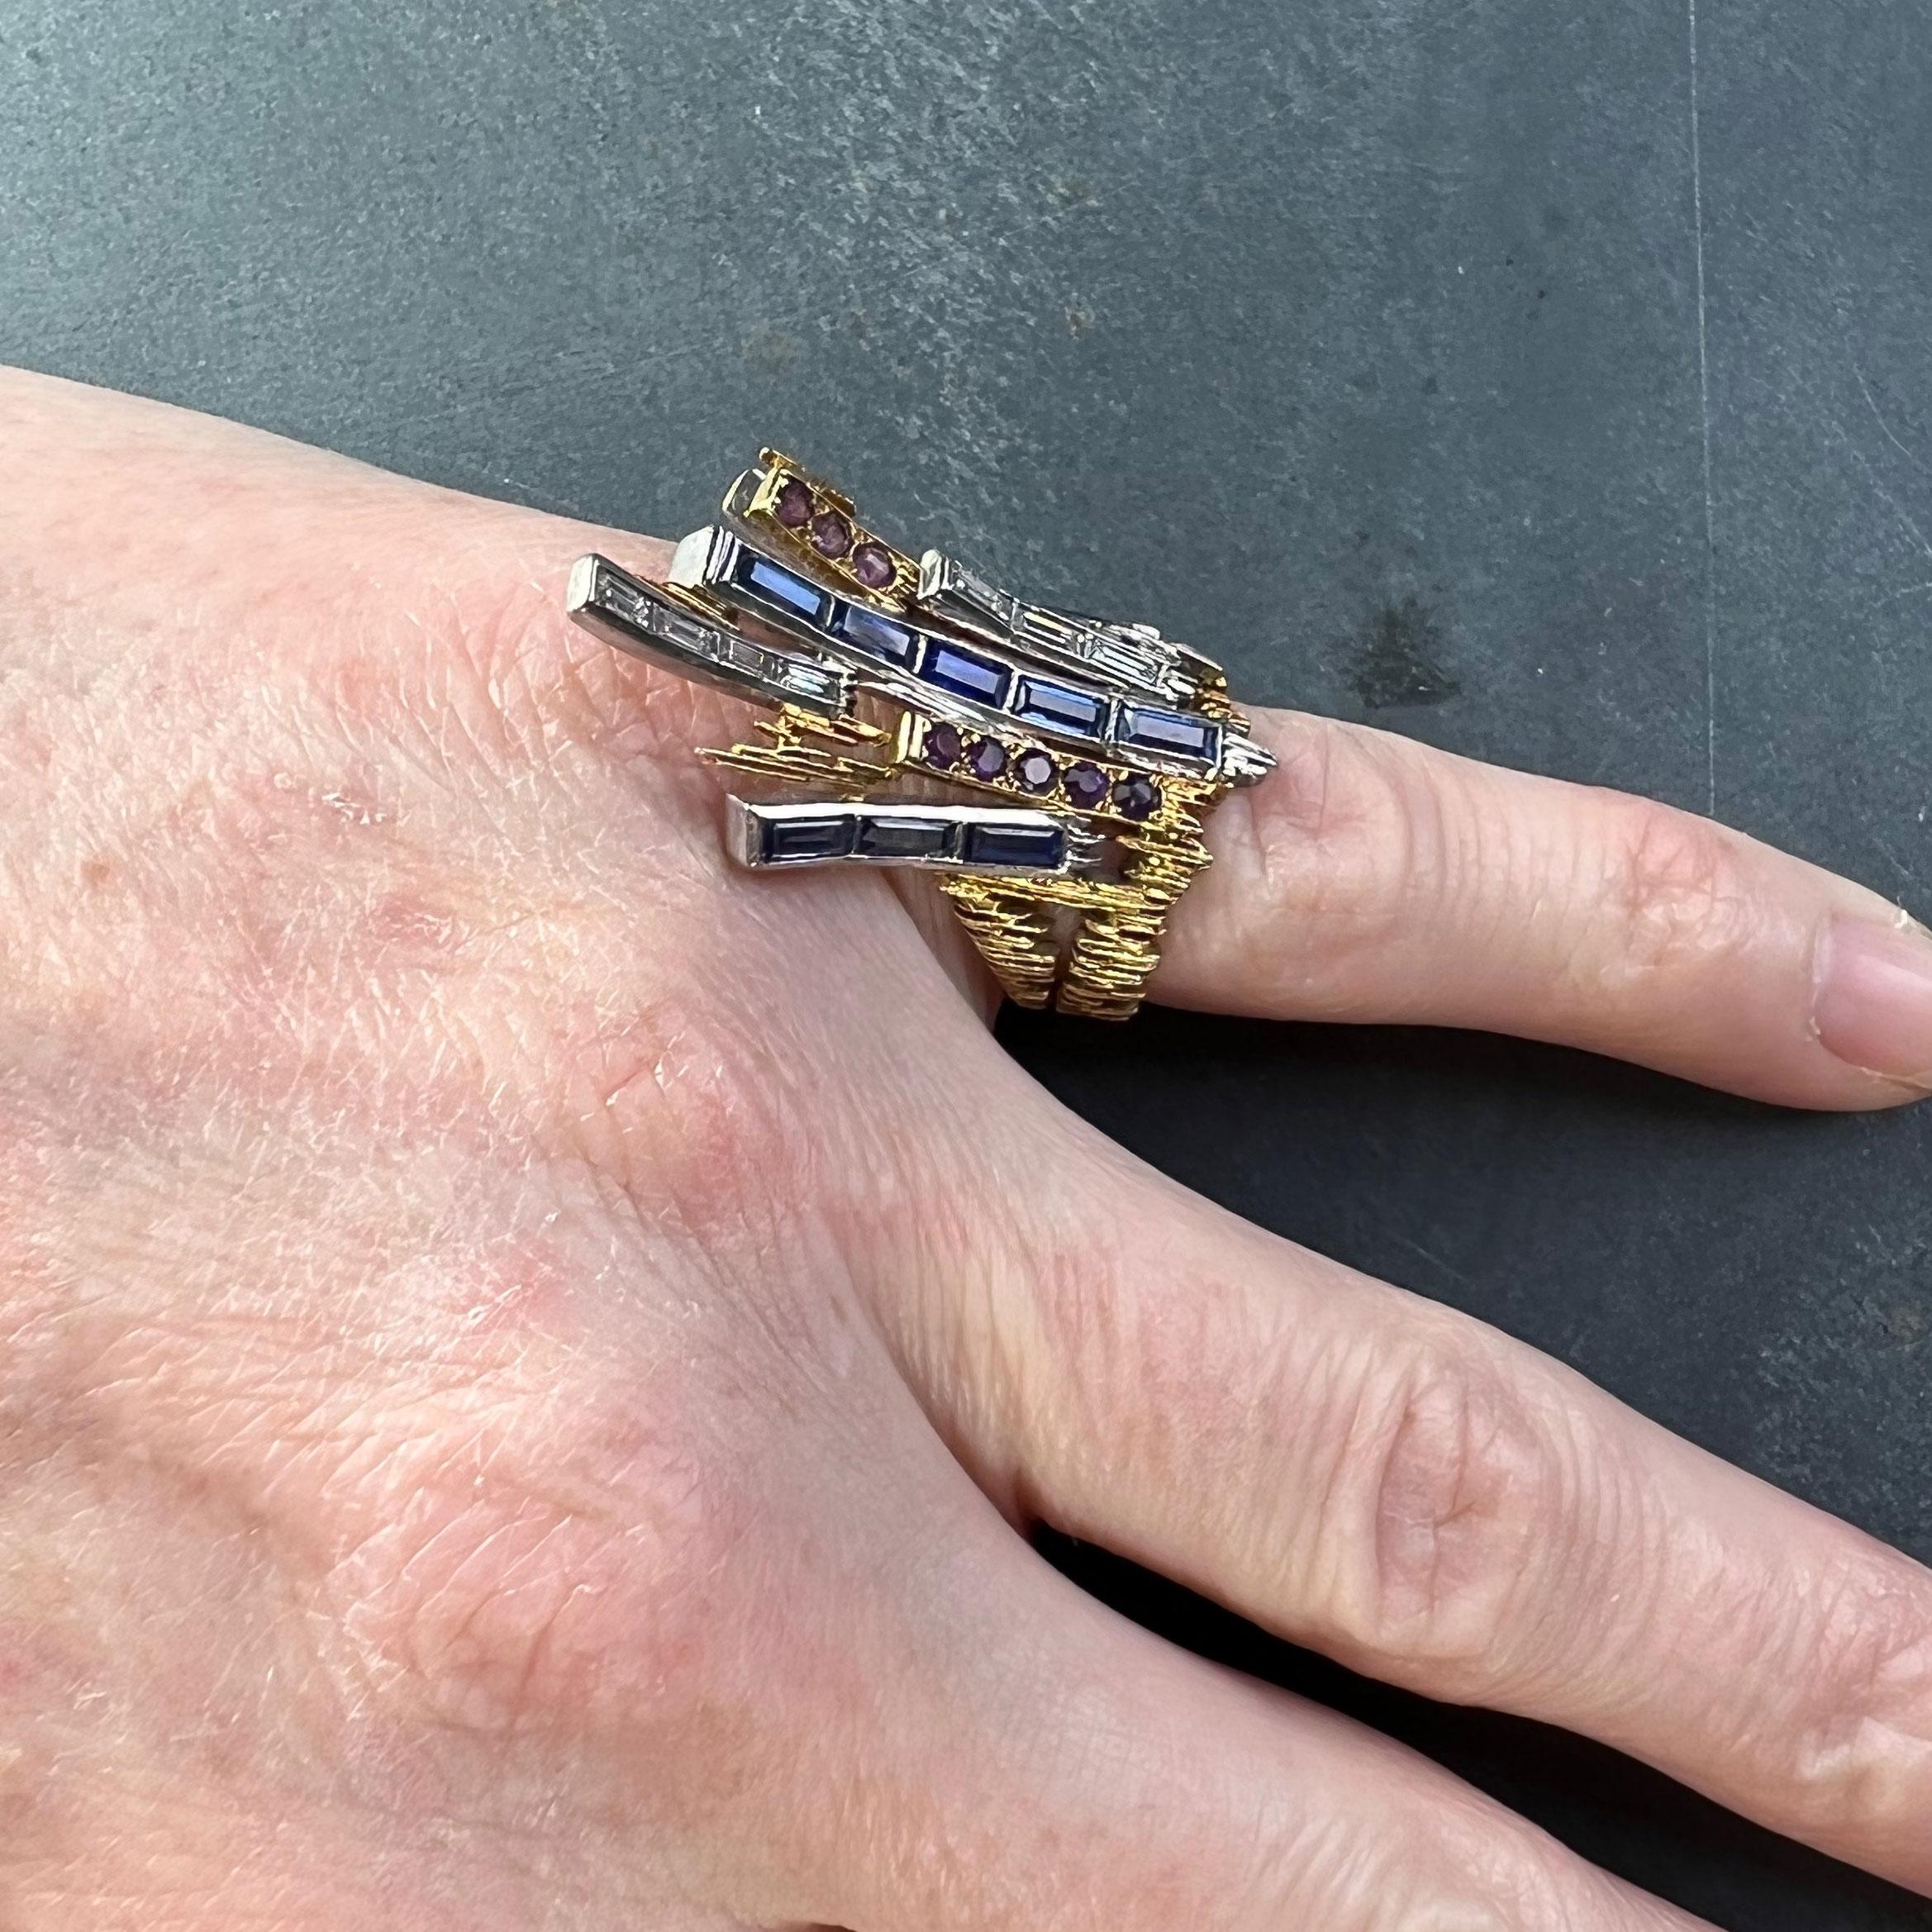 An 18 karat (18K) yellow and white gold pinky ring designed as a spray of gem-set lines extending from a textured yellow and white gold band. Hallmarked for 18K gold, London, 1965 with makers mark CdeT for Charles de Temple. 

Total approximate gem